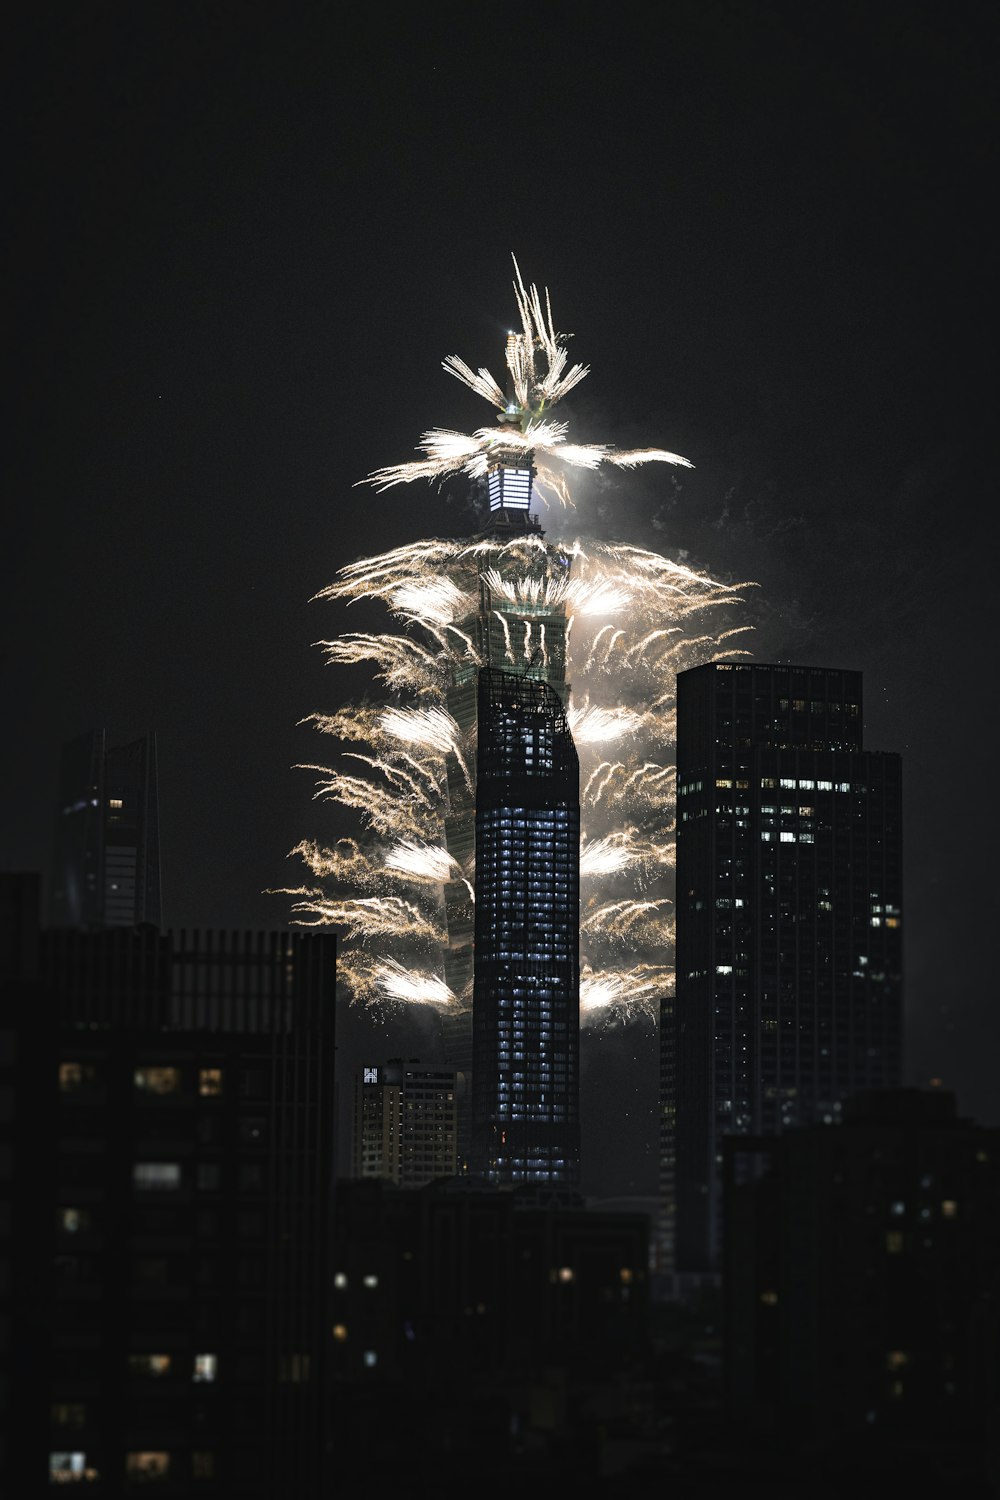 fireworks are lit up the night sky above a city